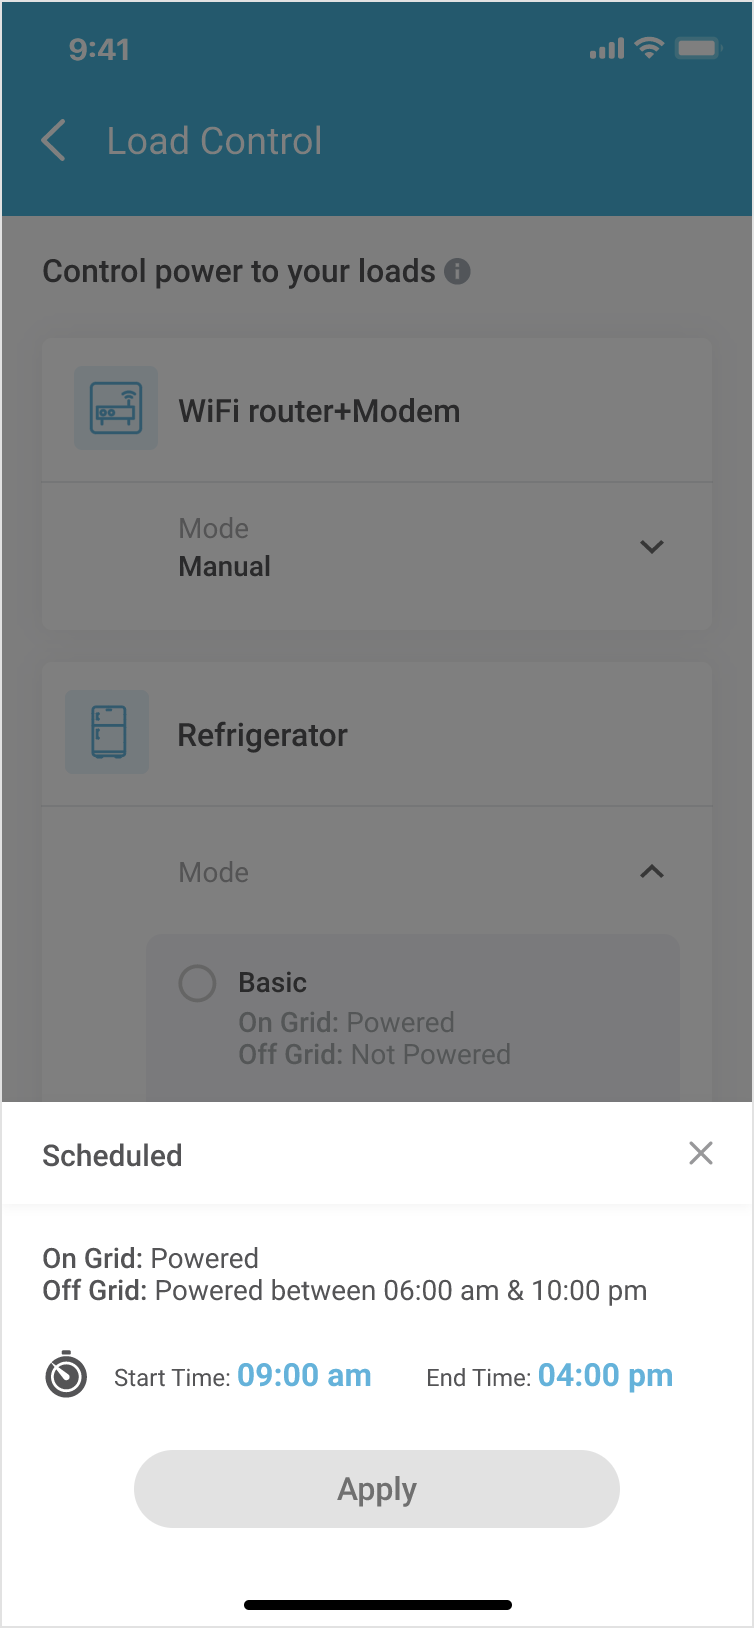 Enphase app load control feature snaphsot